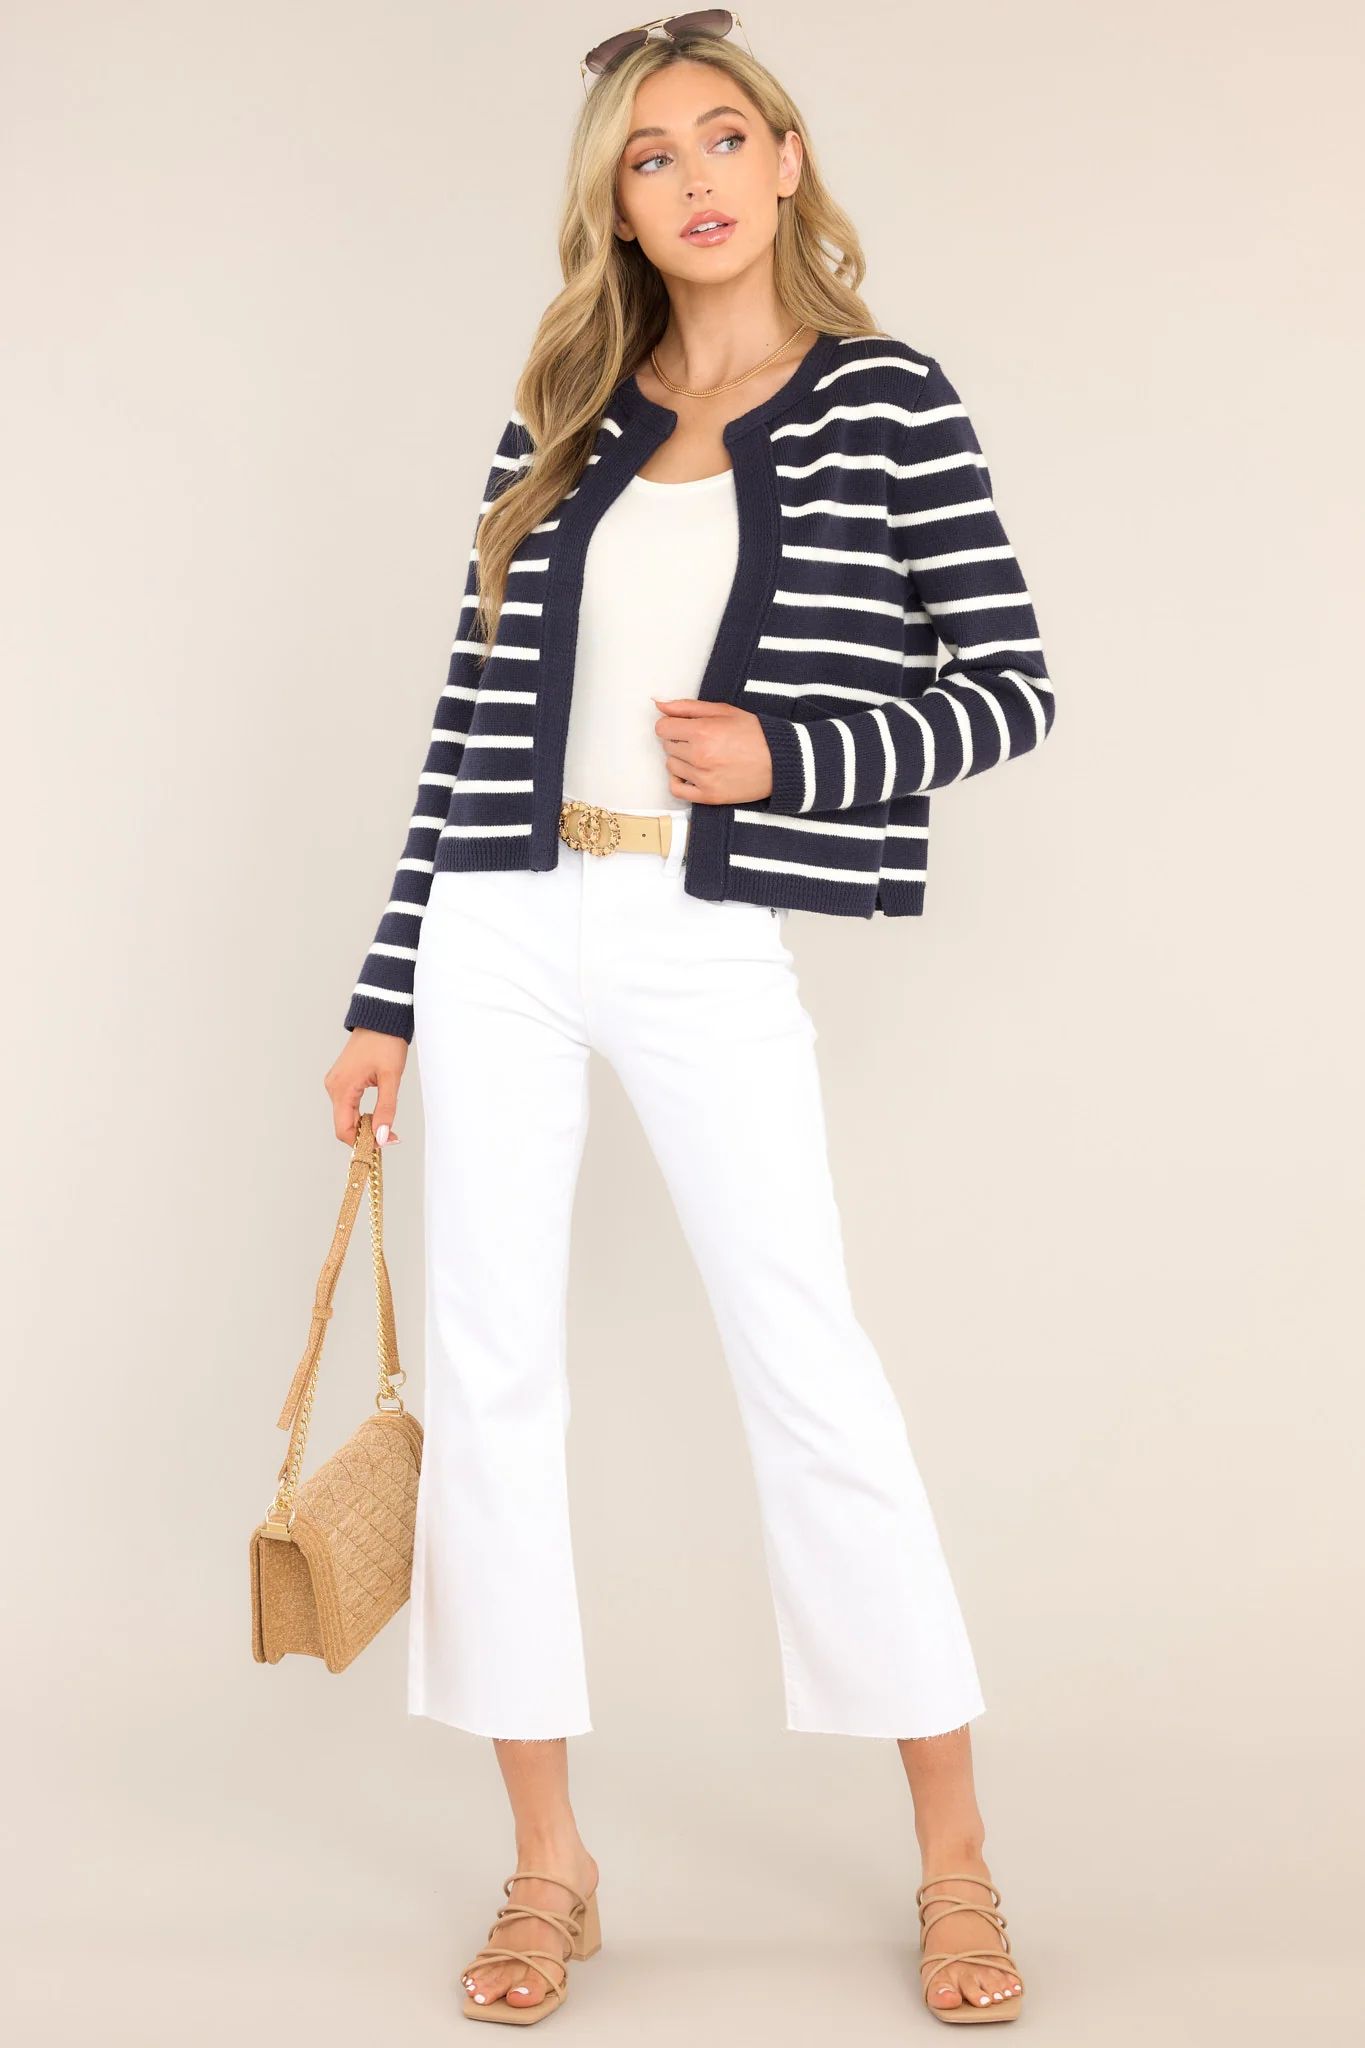 Retail Therapy Navy & White Striped Cardigan | Red Dress